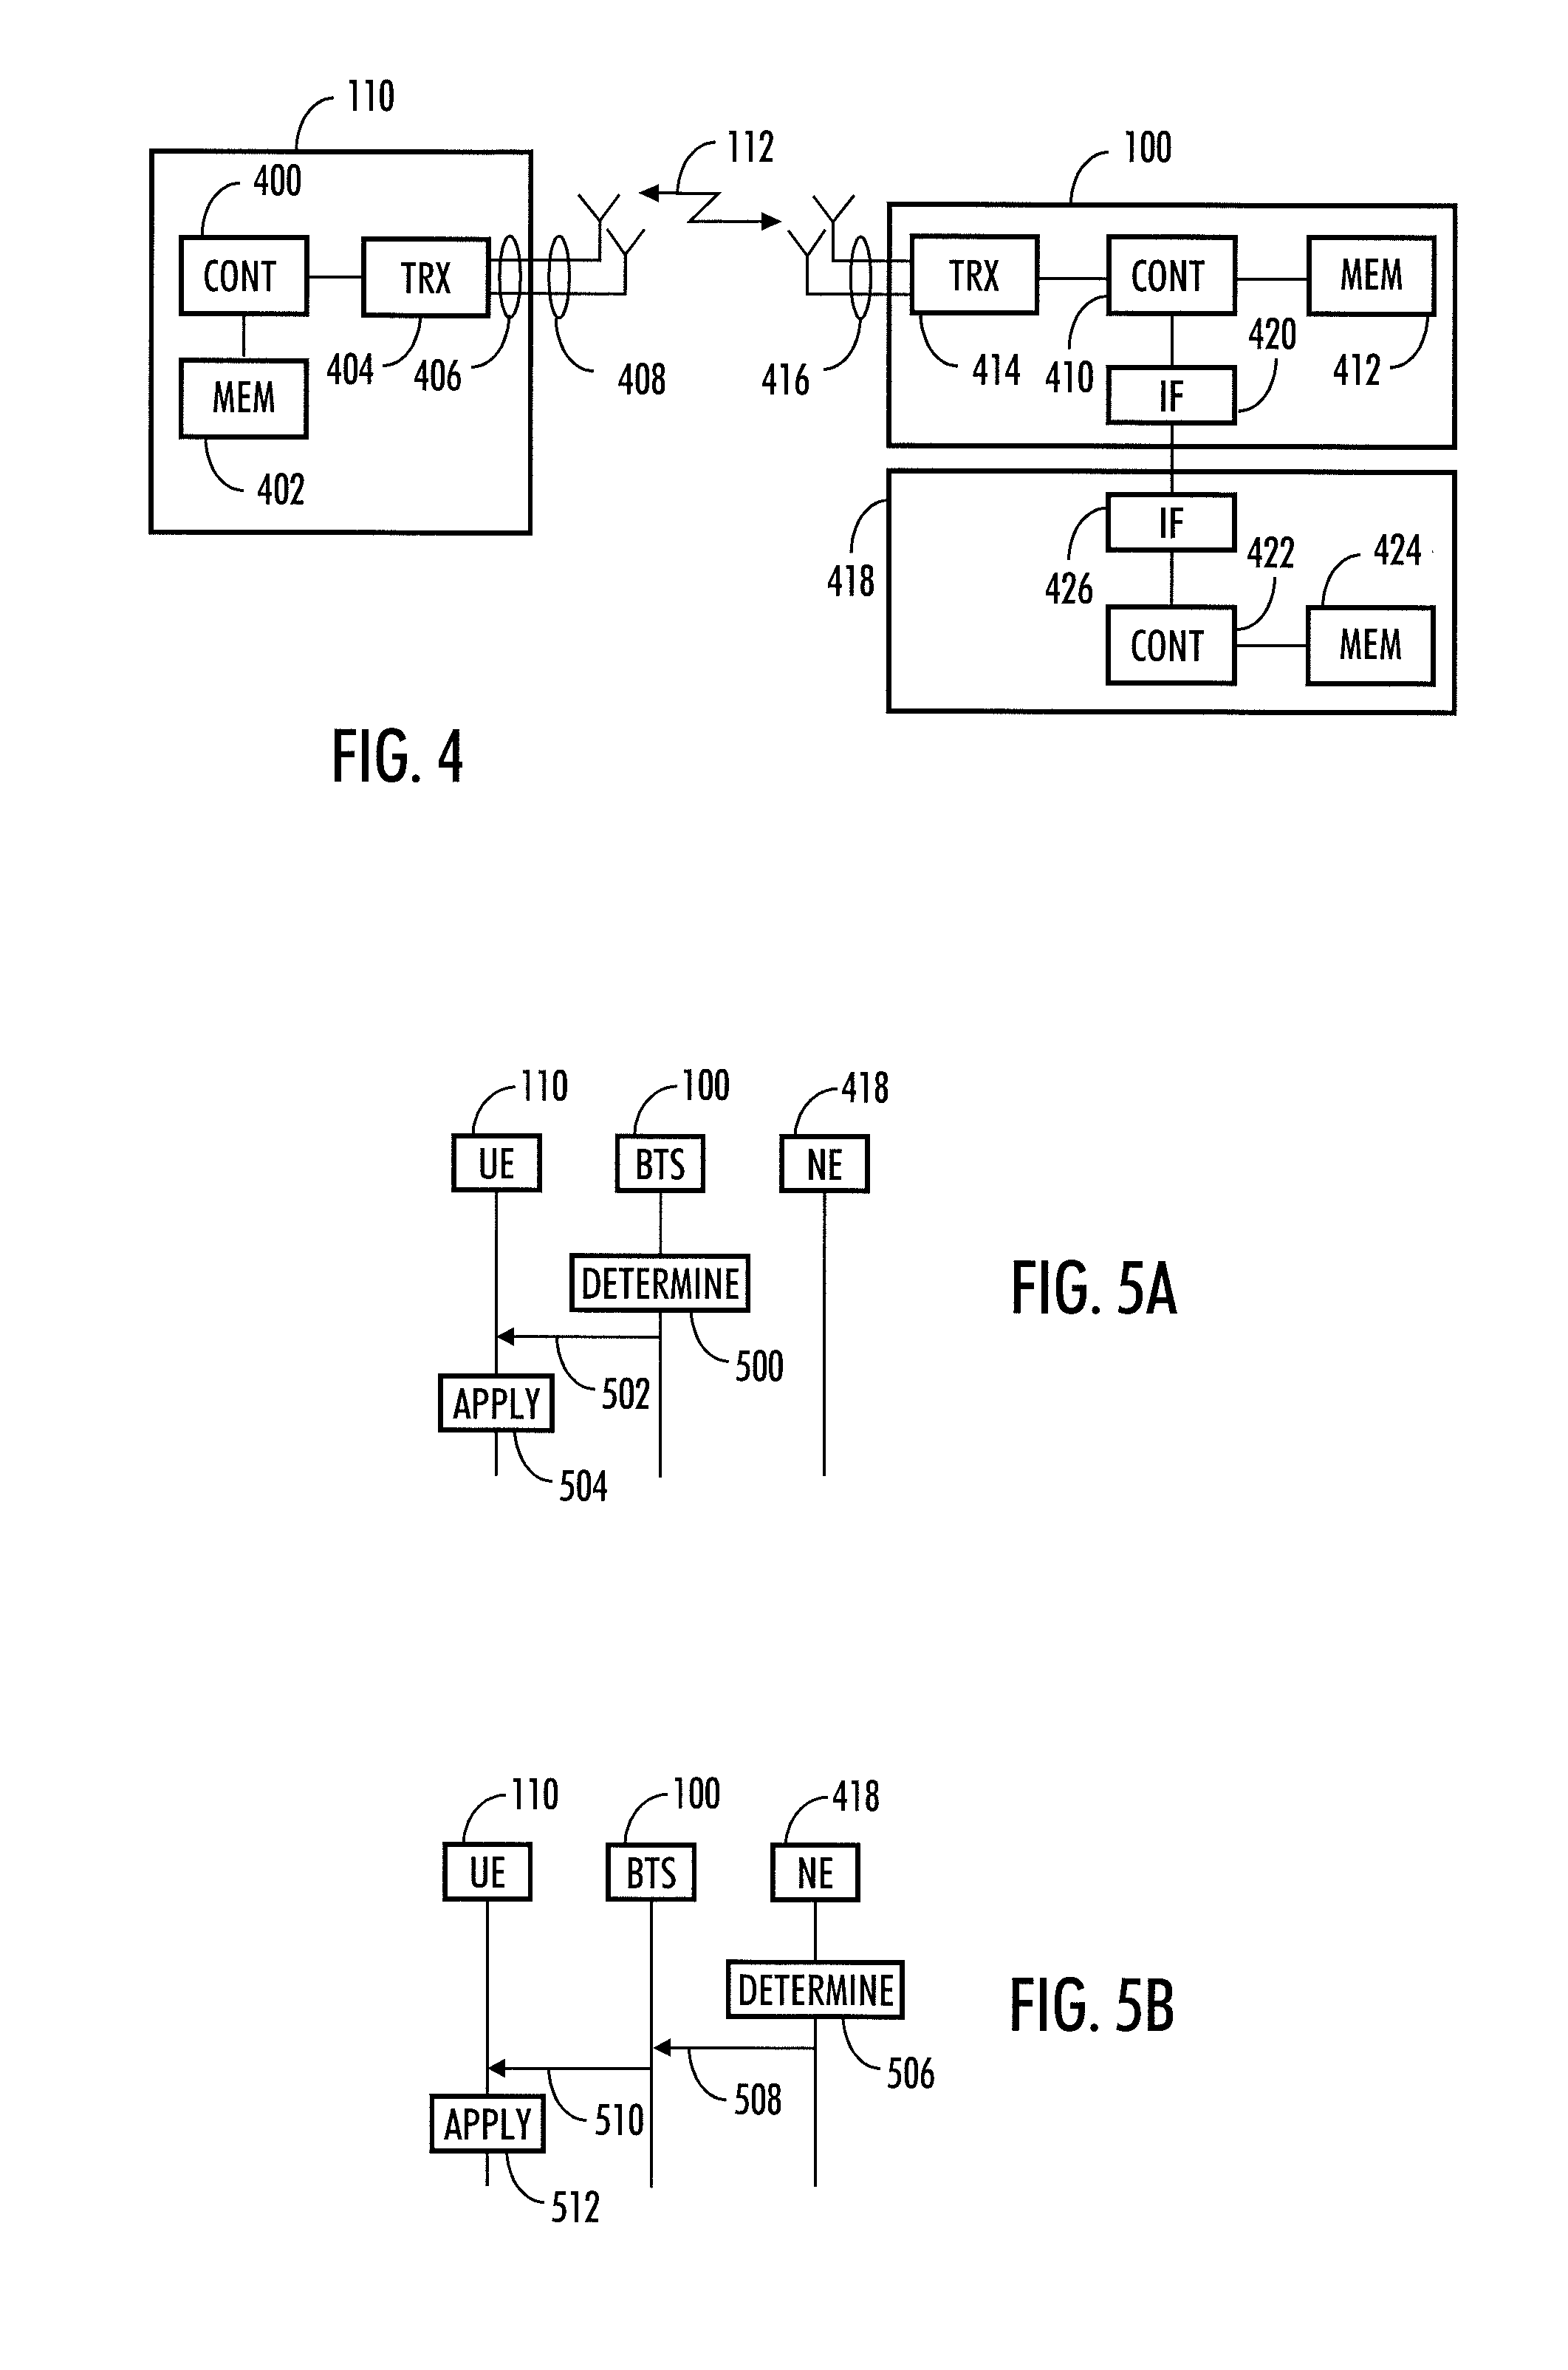 Apparatus and Method for Single User Multiple Input Multiple Output Communication Employing Cyclic Shifts